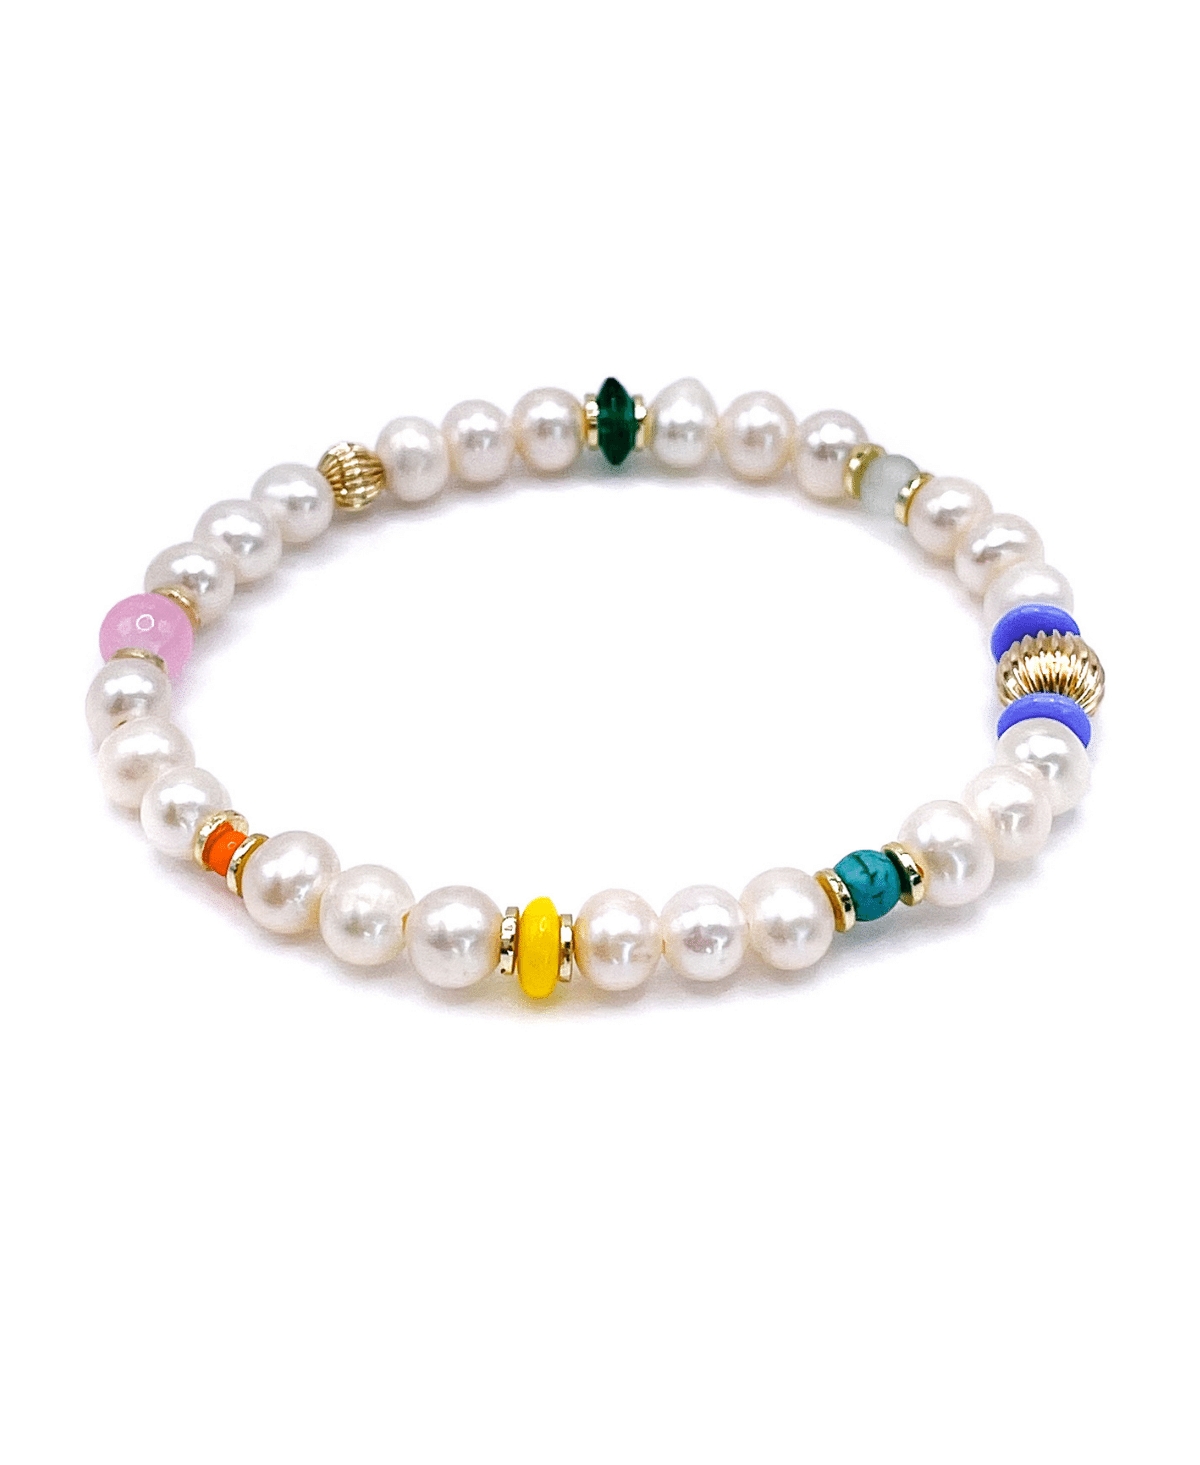 Non-Tarnishing Gold Filled Balls and Freshwater Pearls Stretch Bracelet - Multiple colors